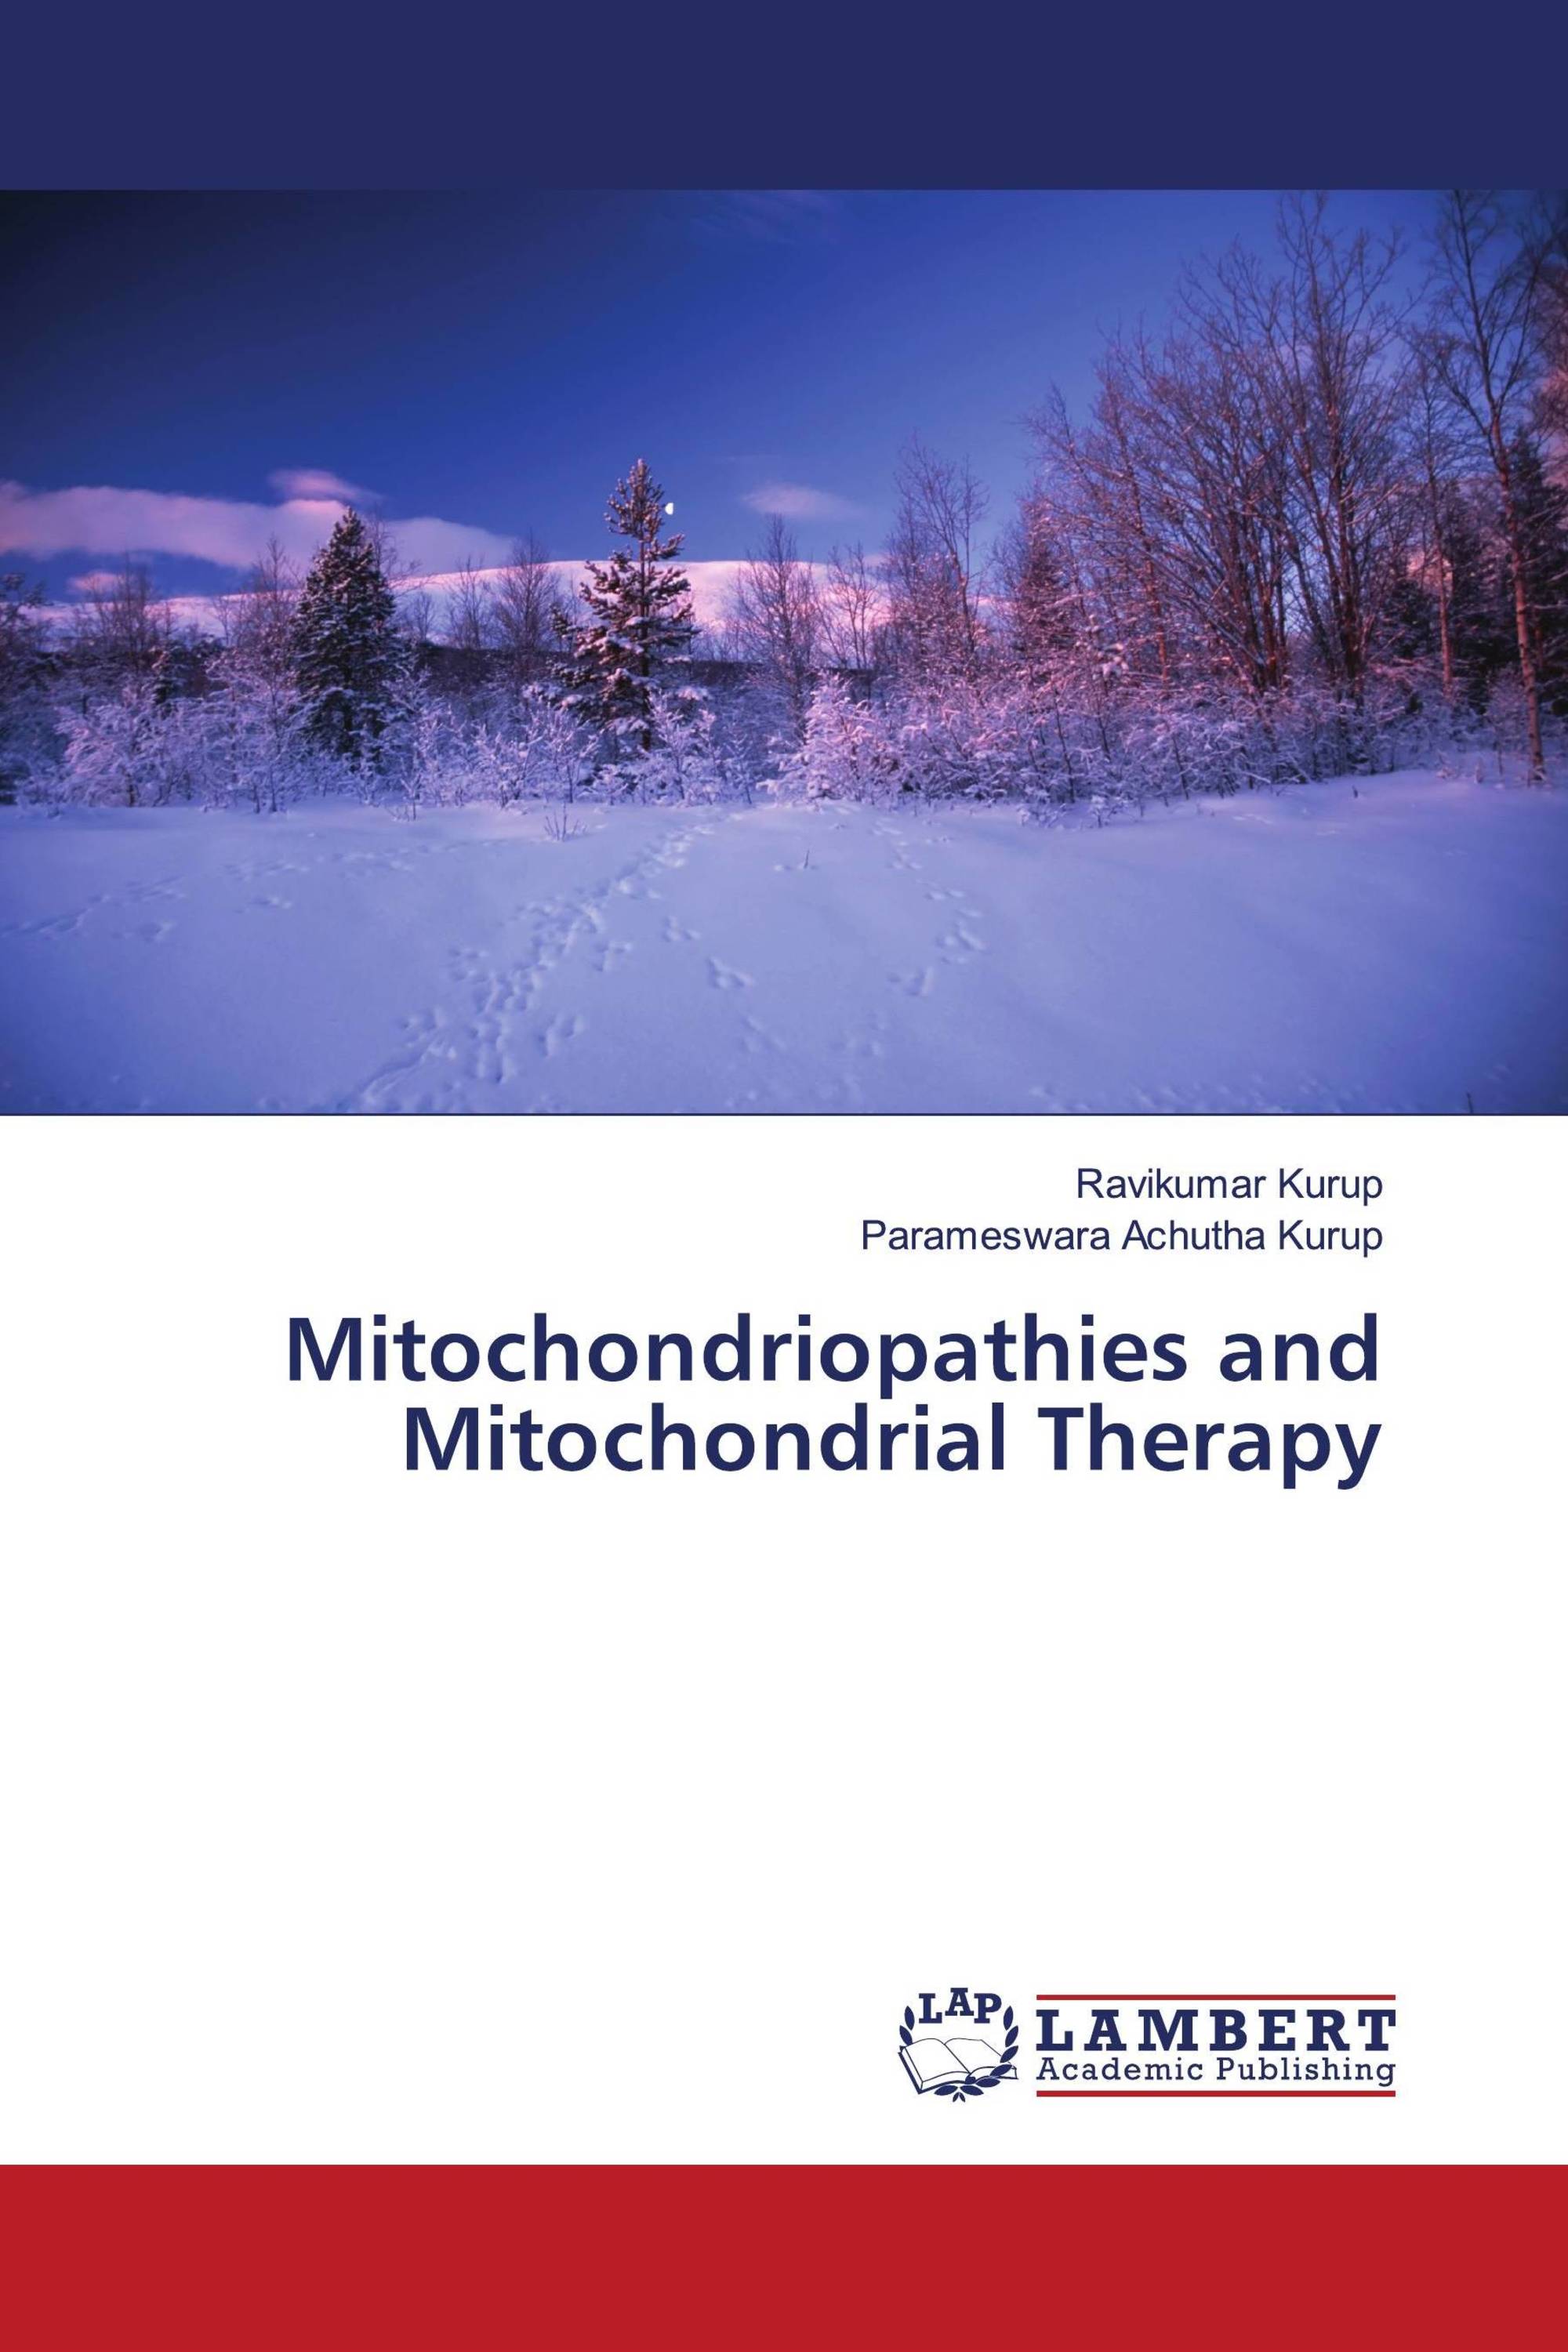 Mitochondriopathies and Mitochondrial Therapy